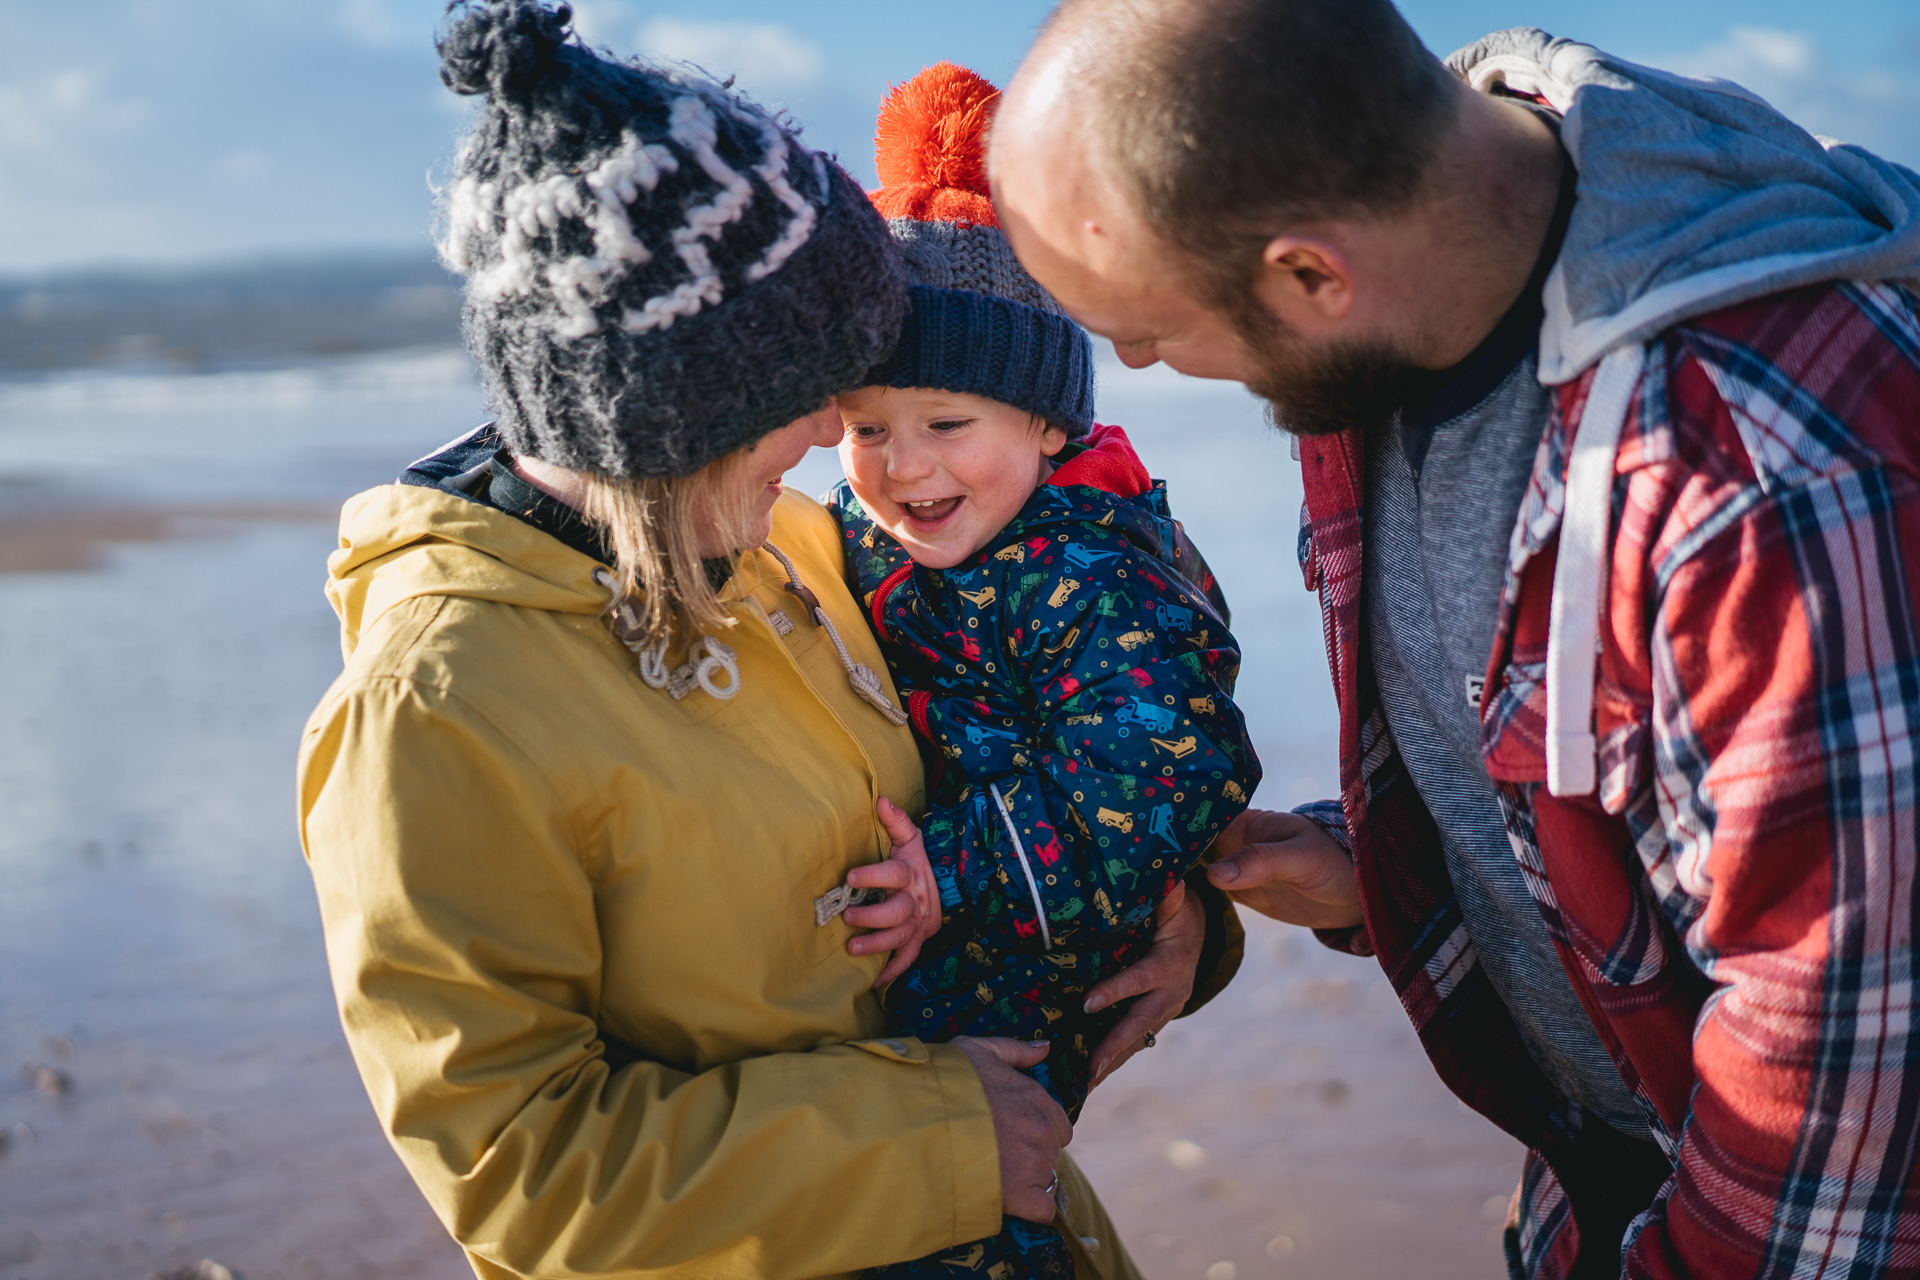 A mother and father laughing with their young son on a beach